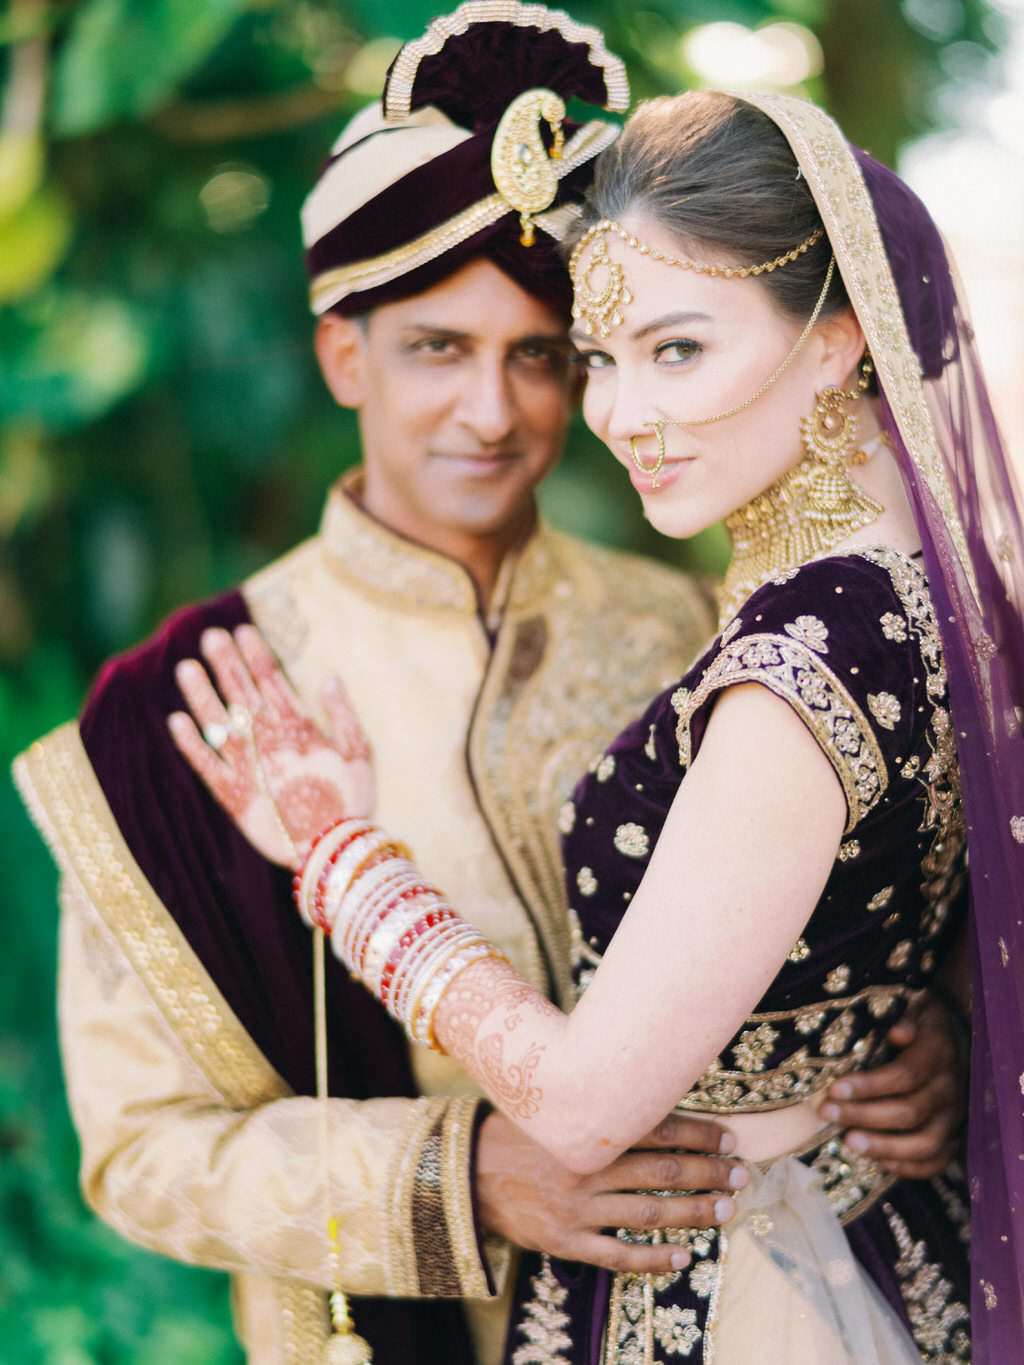 Traditional Indian Hindu Bride and Groom First Look Wedding Portrait, Groom in Black and Gold Sherwani Turban, Bride in Custom Purple Velvet and Gold Lehenga and Extravagant Gold Bridal Jewelry, Bridal Mehndi Henna Tattoo | Tampa Bay Bridal Hair and Makeup Artist Michele Renee The Studio